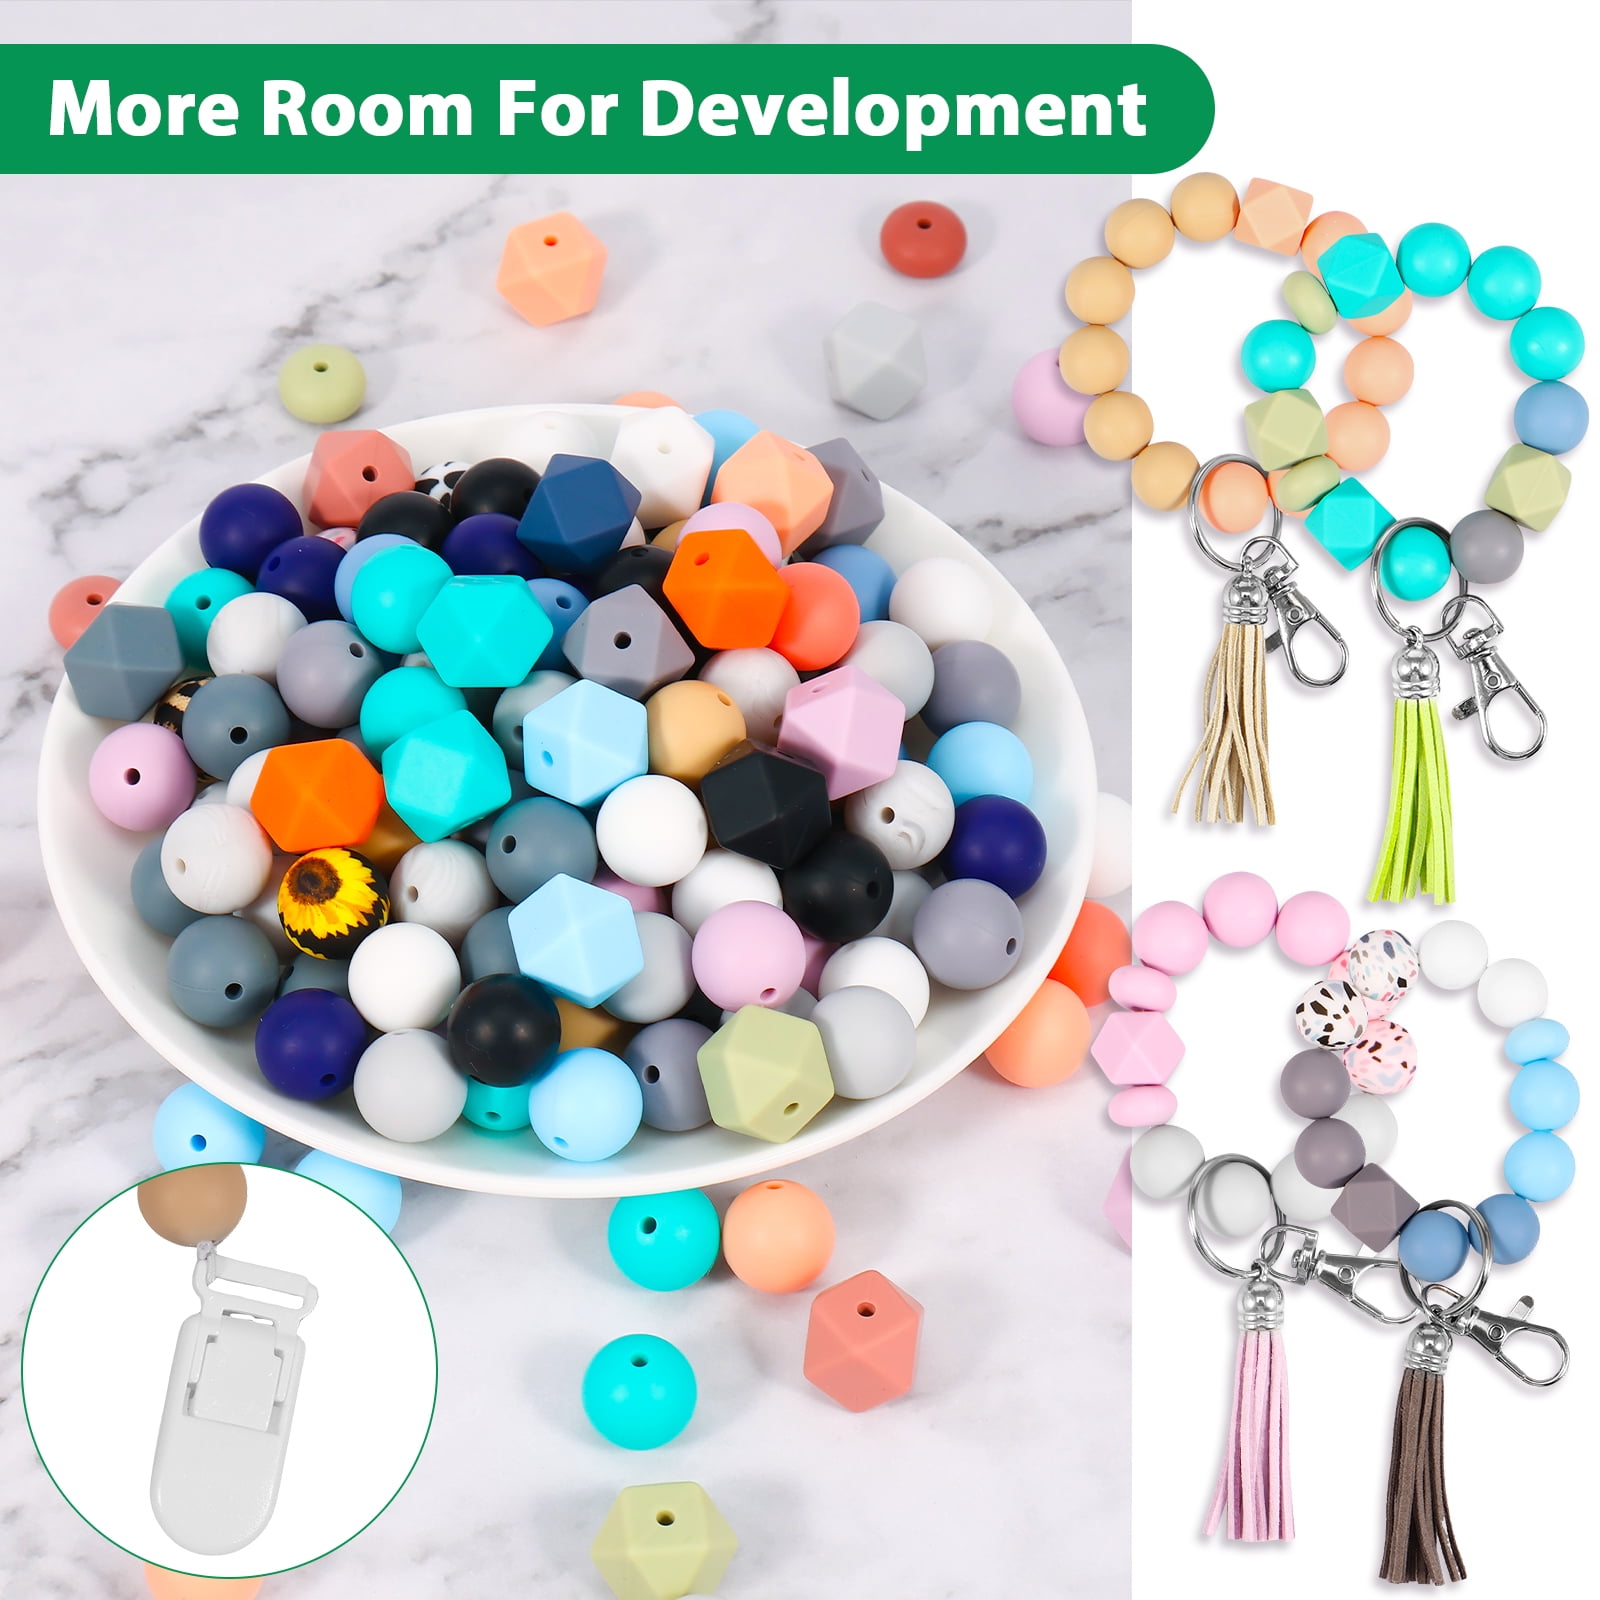 BOZUAN 15mm 660 Silicone Beads Bulk Kit Silicone Beads for Keychain Making Kit, Multiple Styles and Shapes Silicone Beads Bulk Rubber Beads for